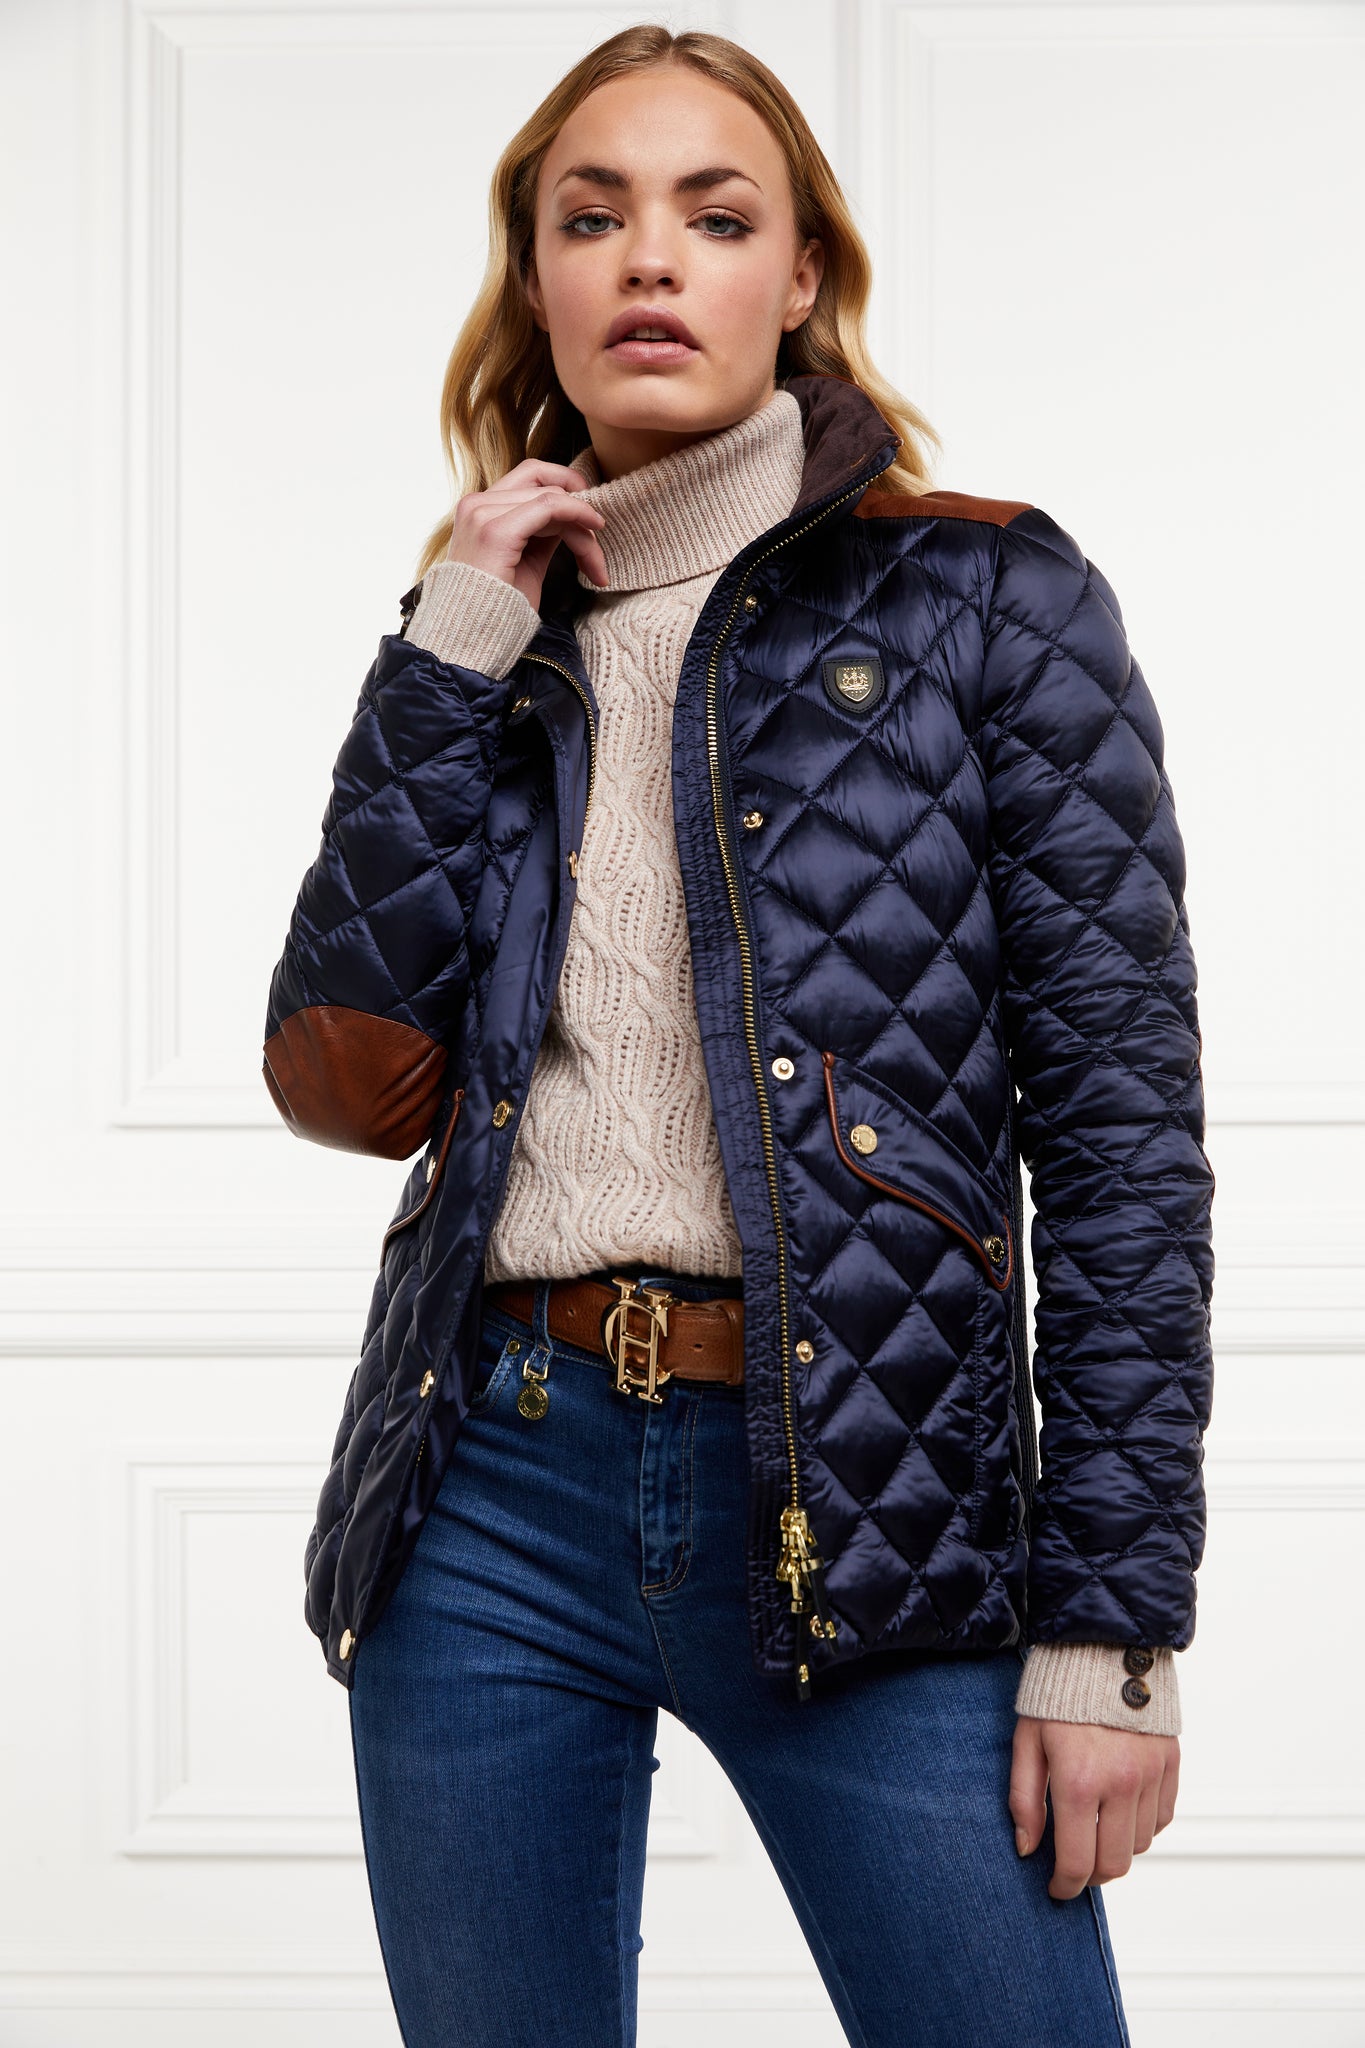 womens diamond quilted navy jacket with contrast tan leather elbow and shoulder pads large front pockets and shirred side panels